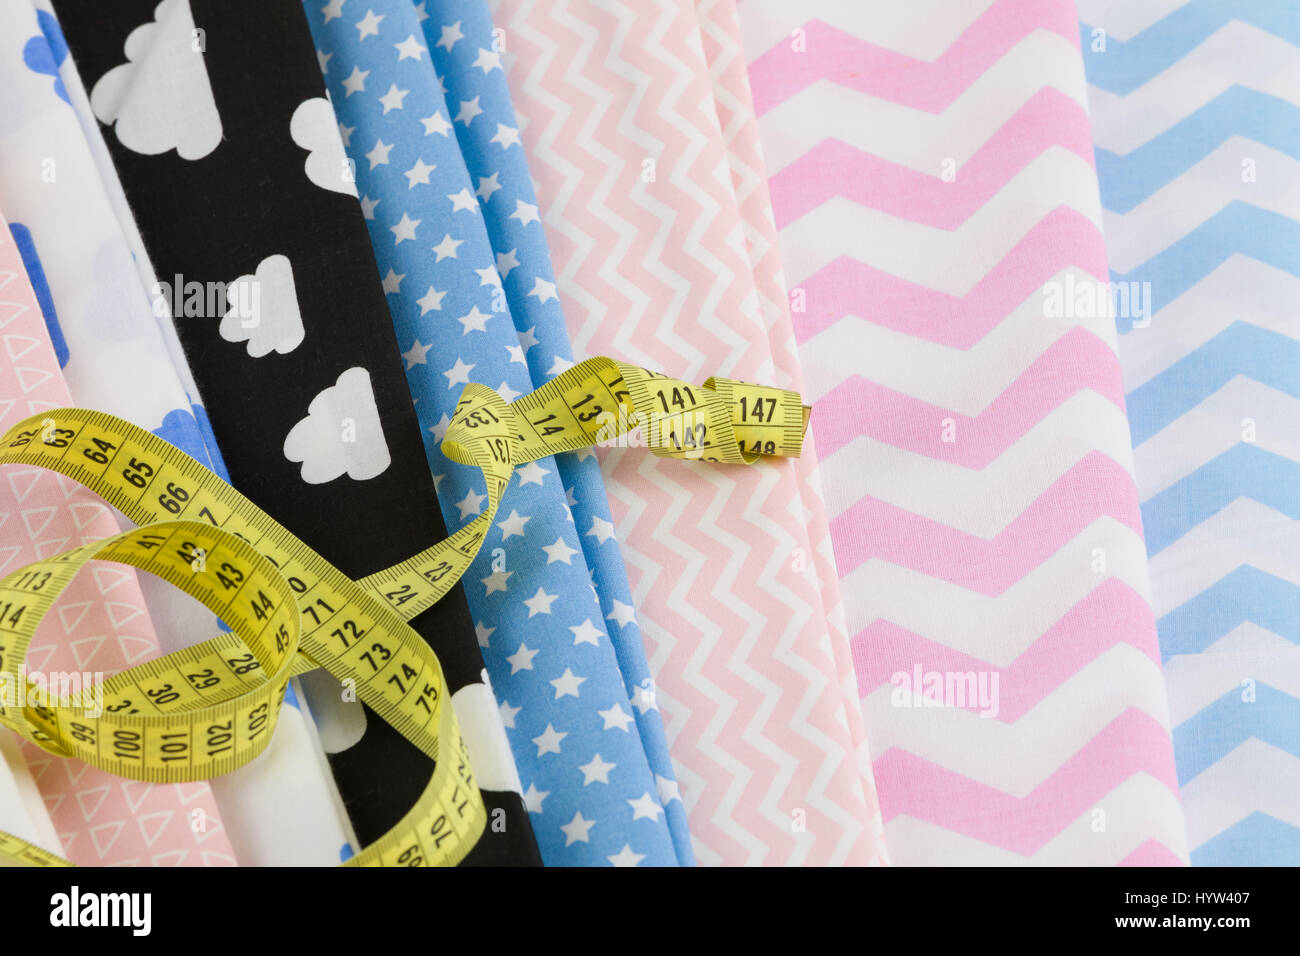 cotton fabric material and tailor measurement tape Stock Photo